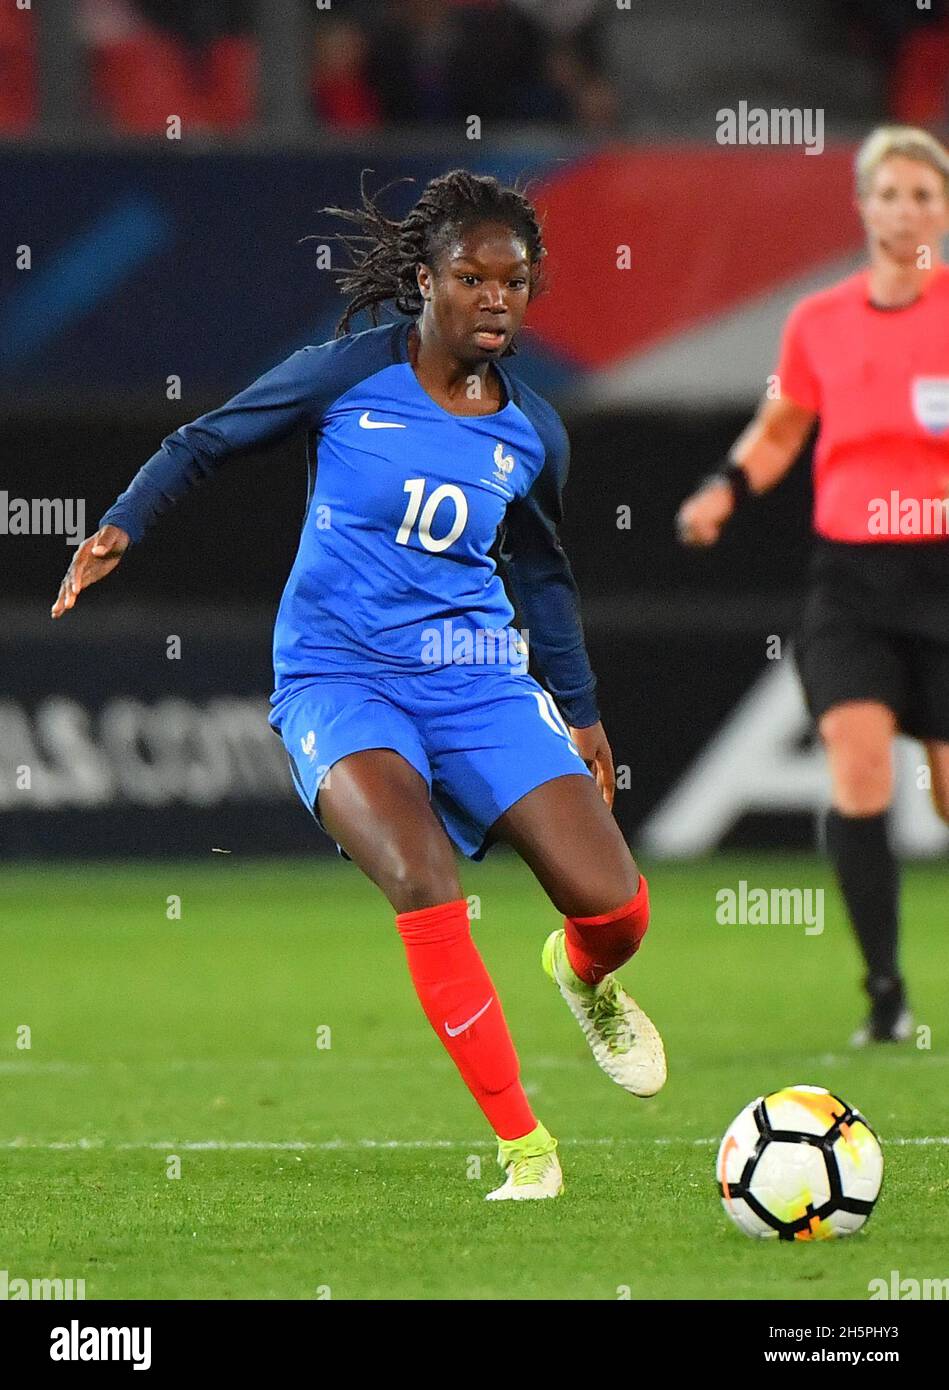 File photo dated October 20, 2017 of France 's Aminata Diallo during the International friendly match between France and England held at Stade du Hainaut in Valenciennes, France. PSG midfielder Aminata Diallo has been arrested in connection with an attack on her PSG team-mate Kheira Hamraoui. L’Equipe report that the attack happened after a team get-together on November 4. Hamraoui attended a team meal at a restaurant near Bois de Boulogne in Paris, and returned home with some team-mates, including Diallo, who was driving, a relative of Hamraoui told the French daily. At approximately 10pm, tw Stock Photo